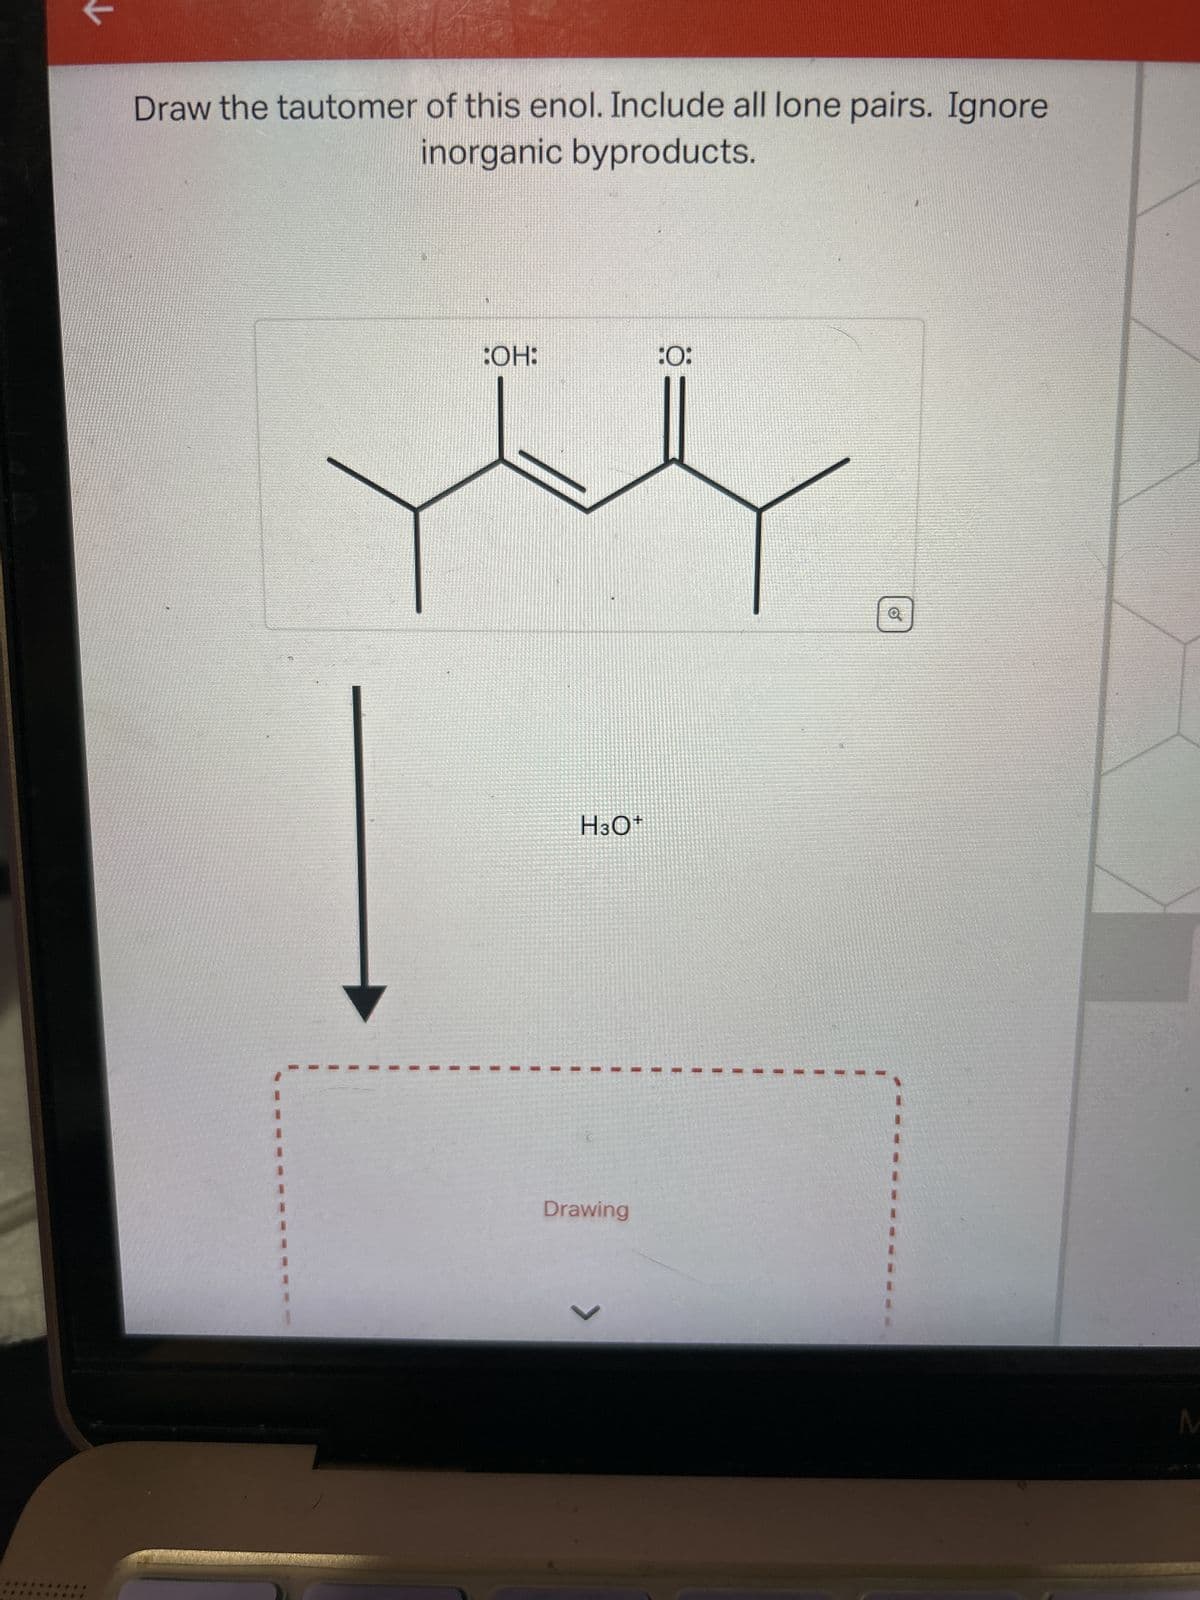 Draw the tautomer of this enol. Include all lone pairs. Ignore
inorganic byproducts.
1
:OH:
H3O+
Drawing
L
:0:
Q
M